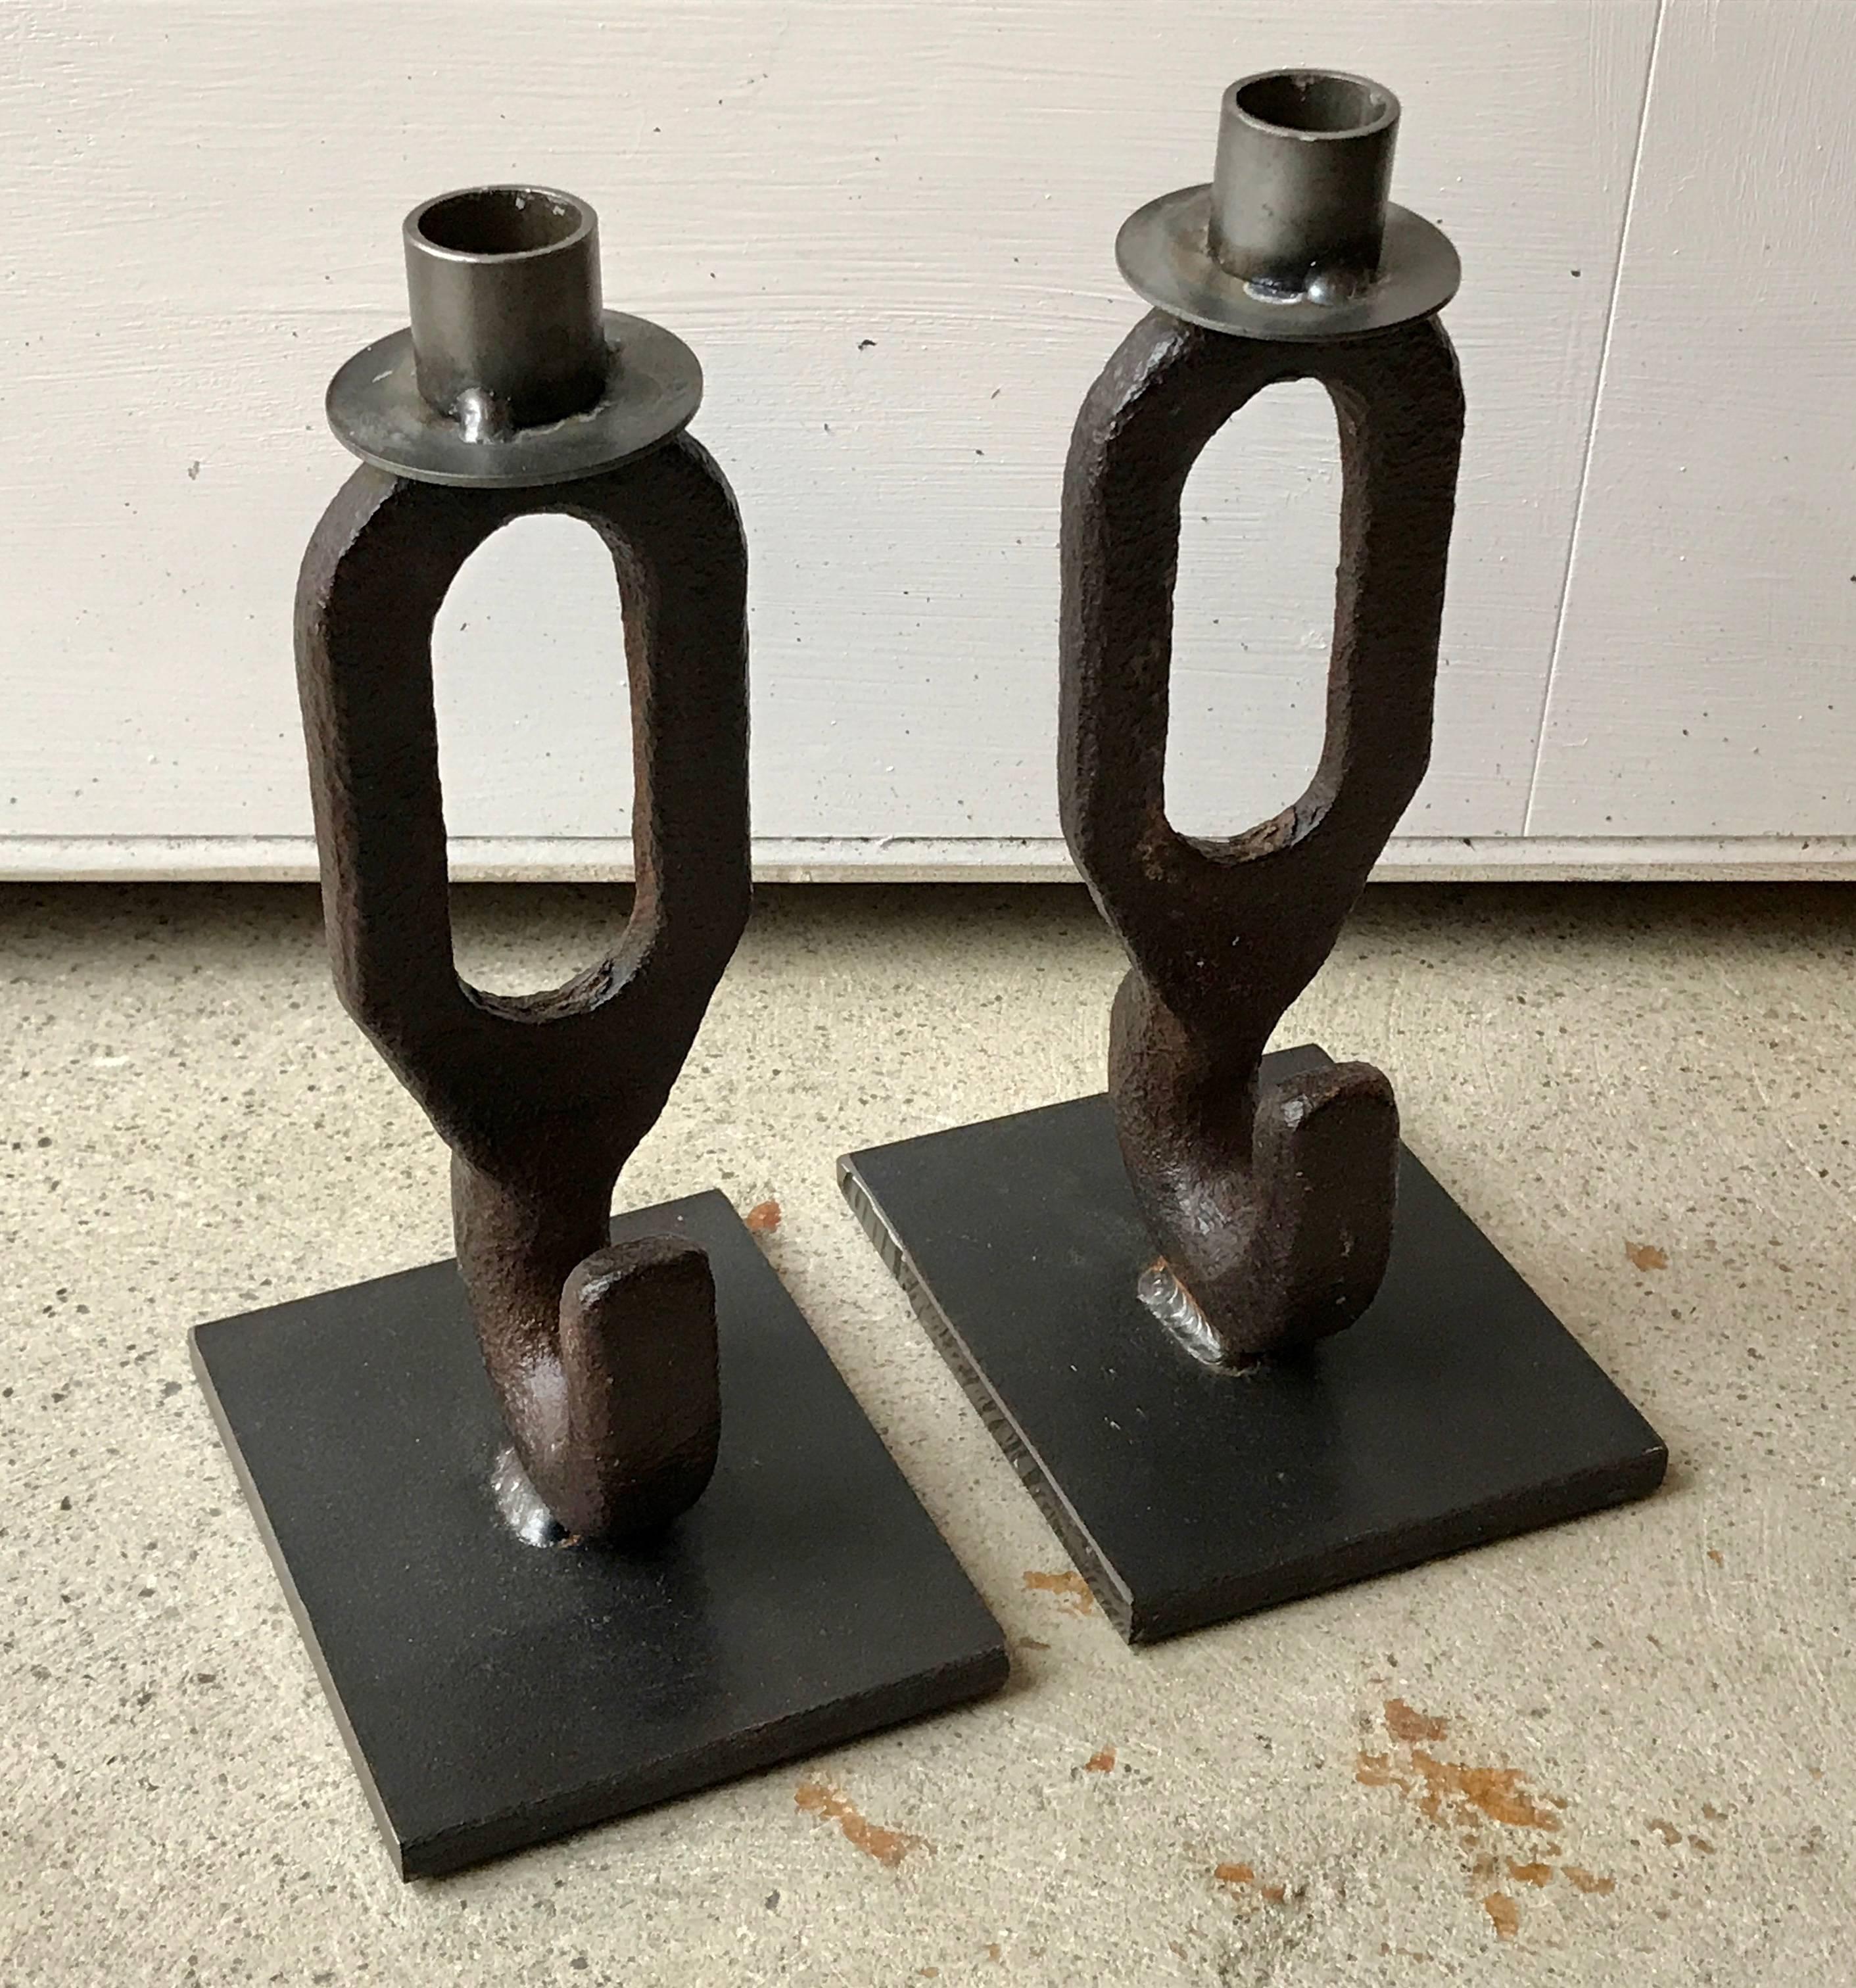 Super cool Brutalist, steam punk and industrial steel candlestick holders by Breck Armstrong. Unique and handcrafted.